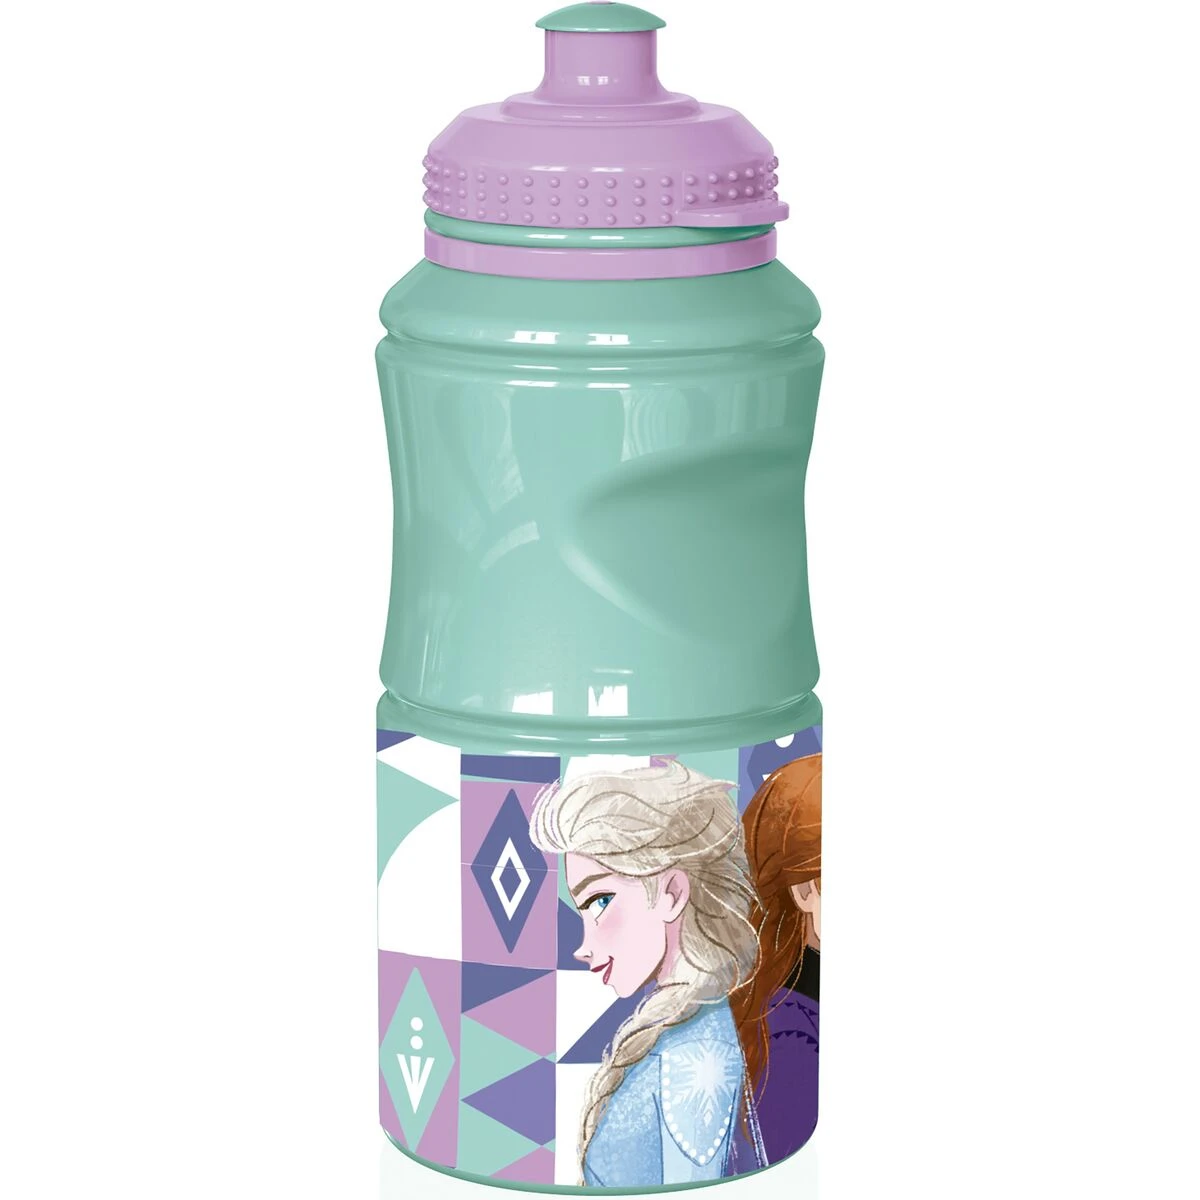 Green and pink bottle with animated characters